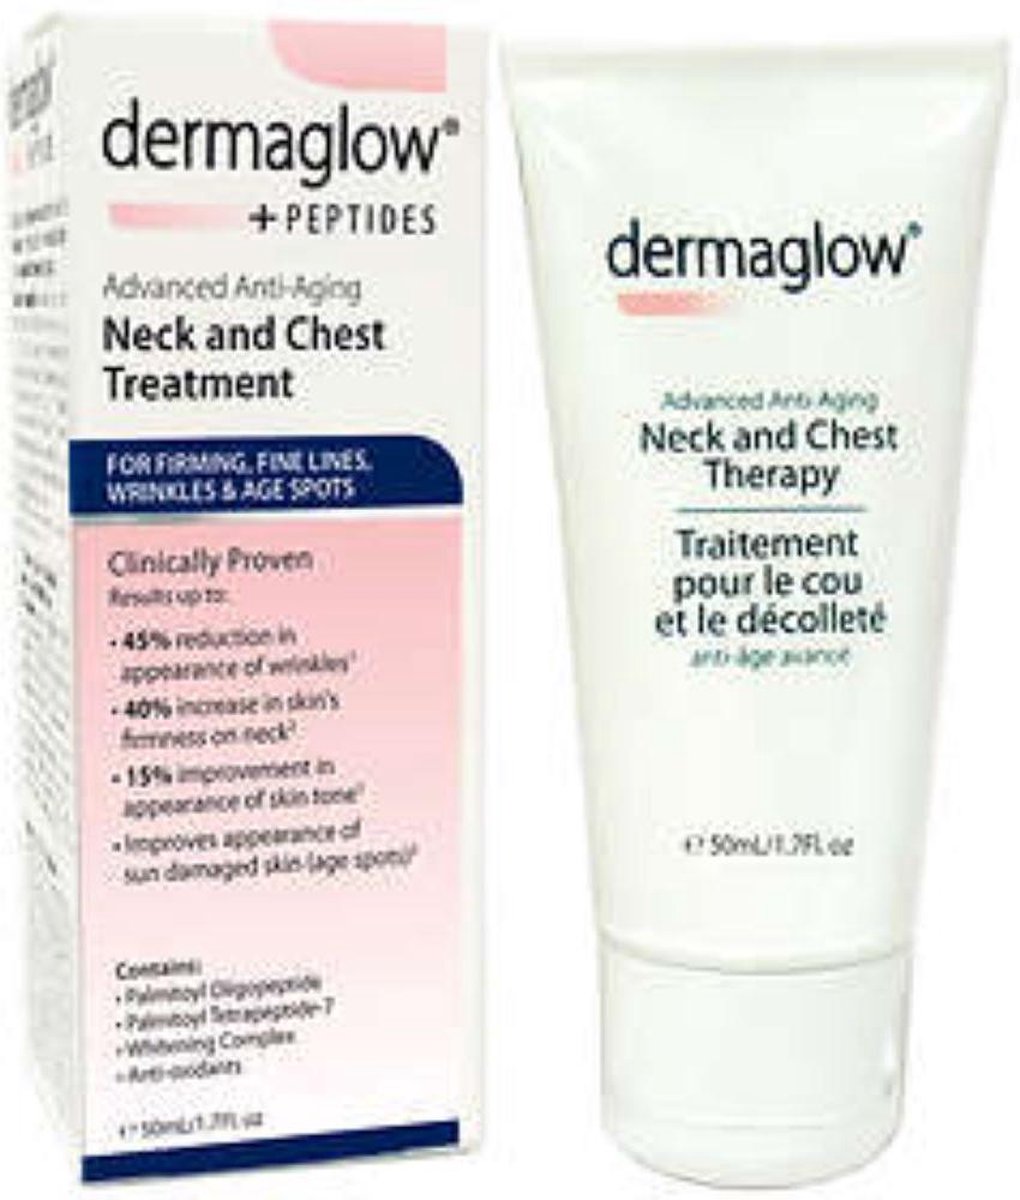 Dermaglow +PEPTIDES Advanced Anti-Aging Neck and Chest Treatment 50ml